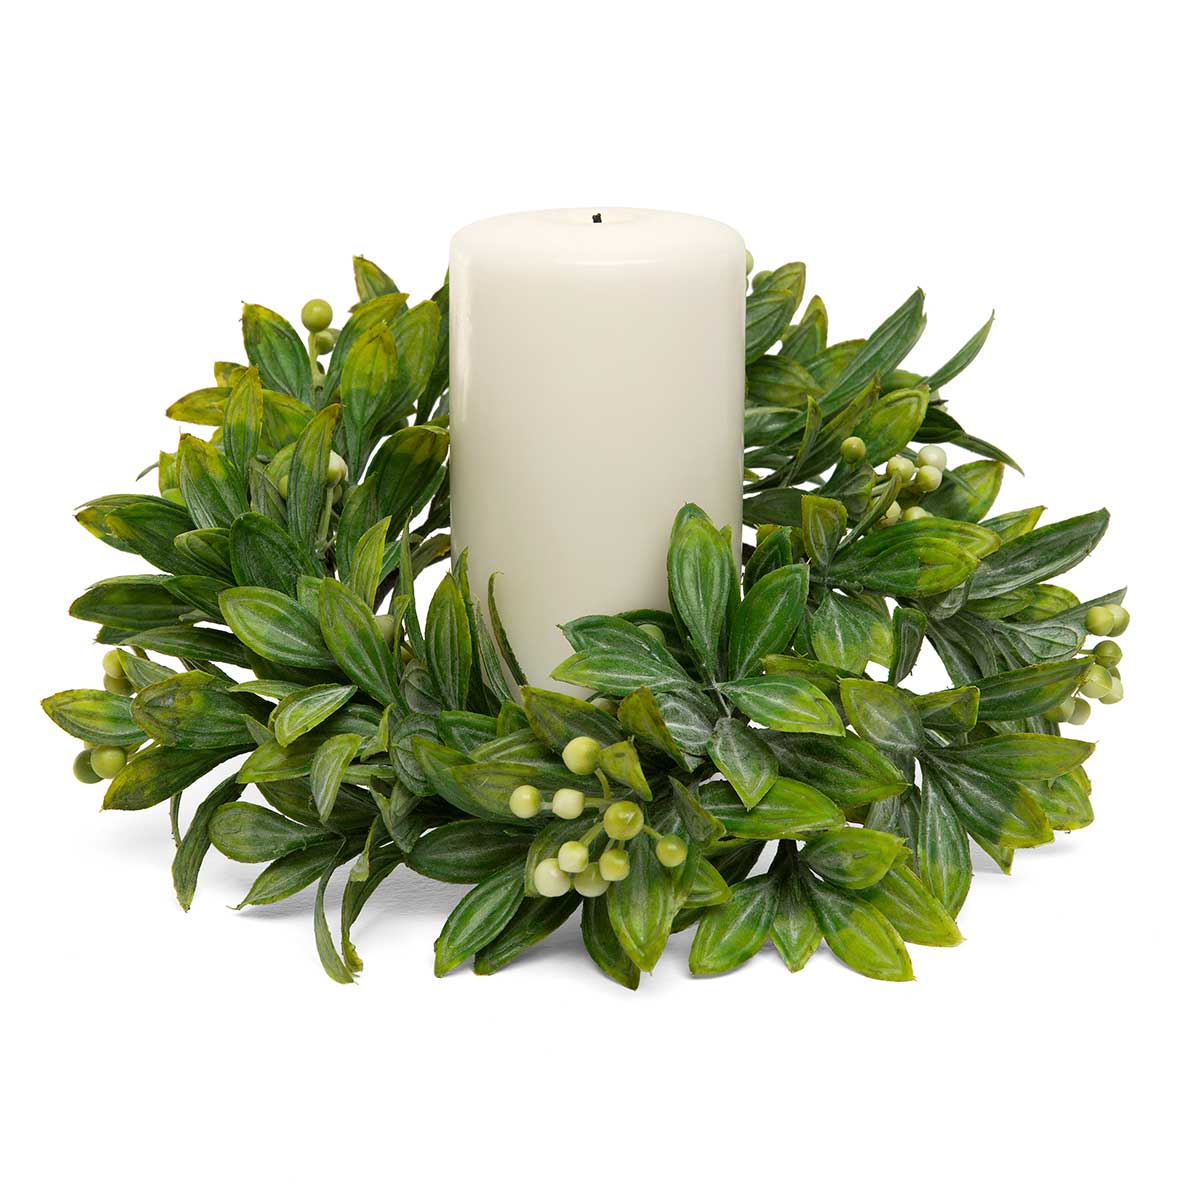 CANDLE RING PRIVET/BERRY 10IN (INNER RING 4.5IN) GREEN - Click Image to Close